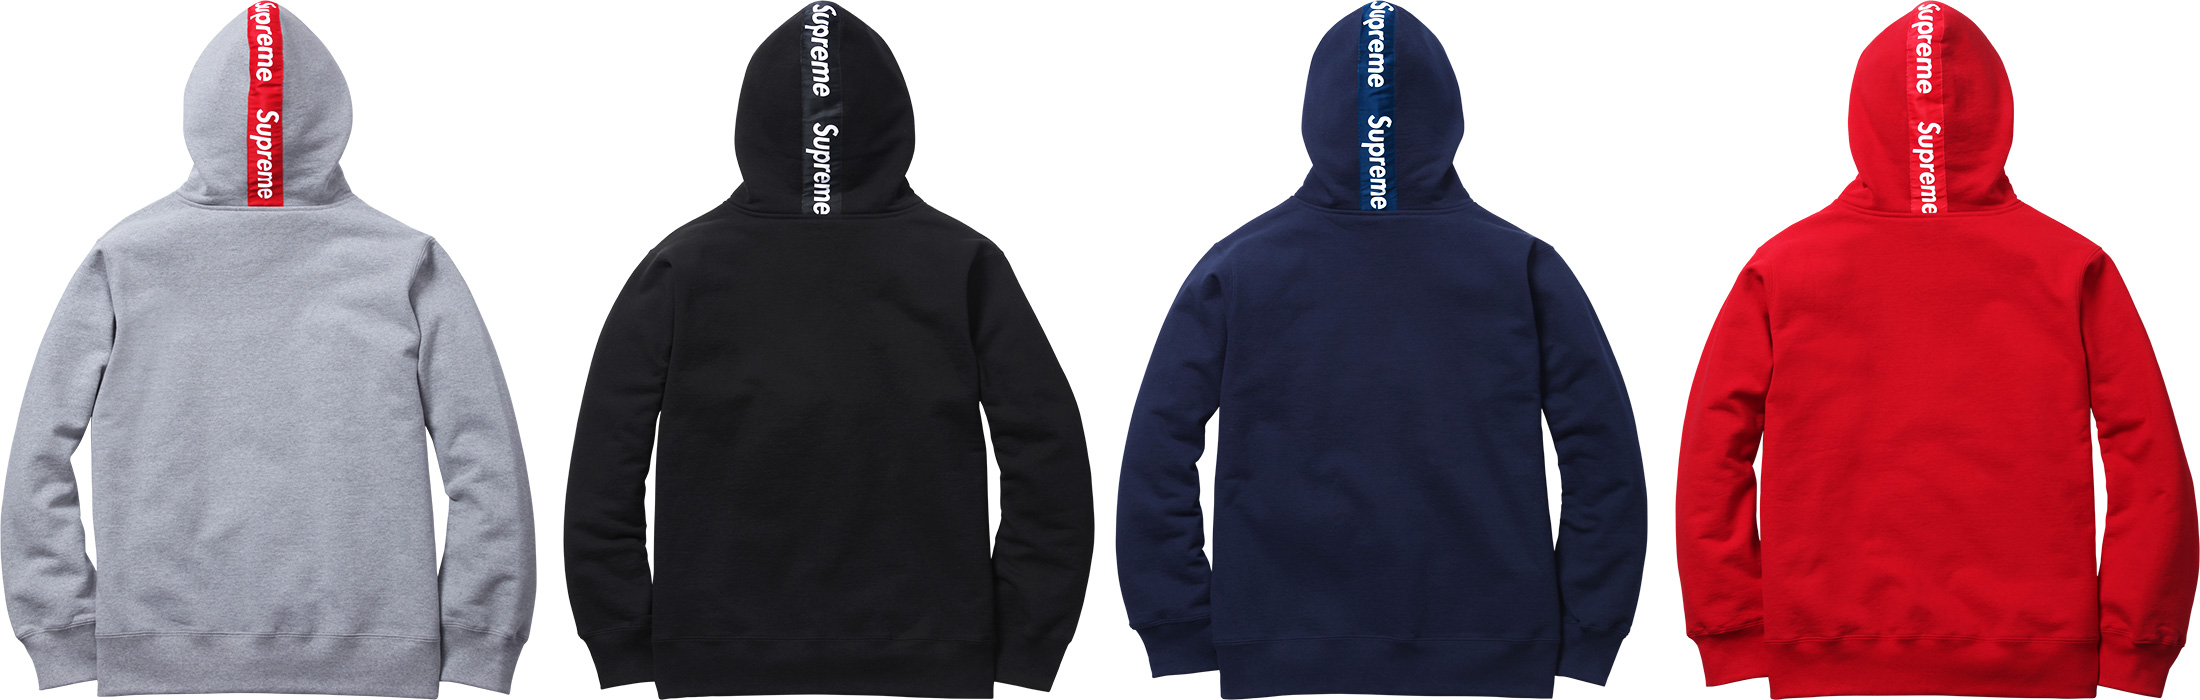 14aw Supreme TAPE LOGO ZIP UP HOODED andeanpacificfoods.com